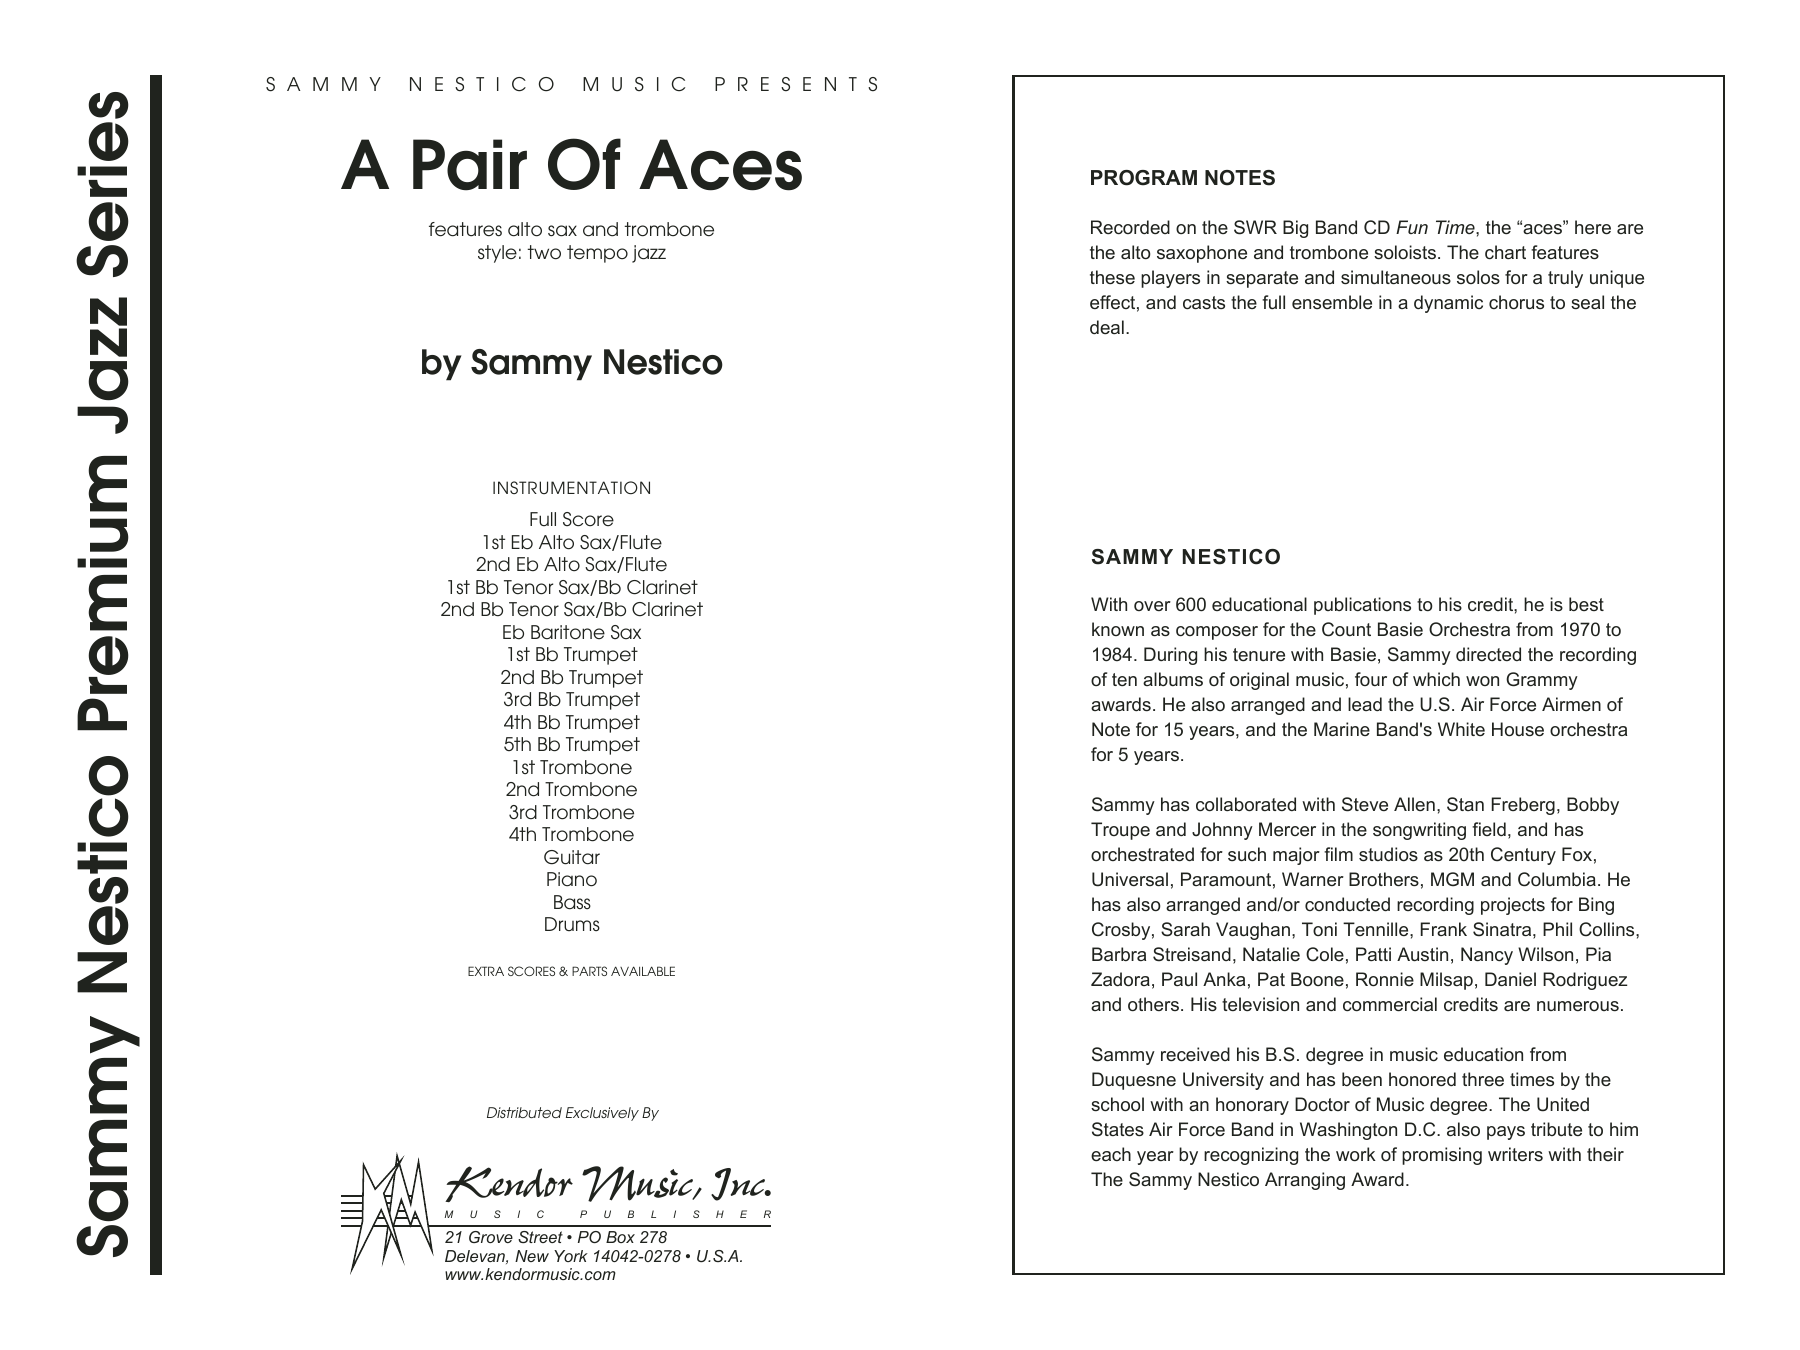 Download Sammy Nestico A Pair Of Aces - Full Score Sheet Music